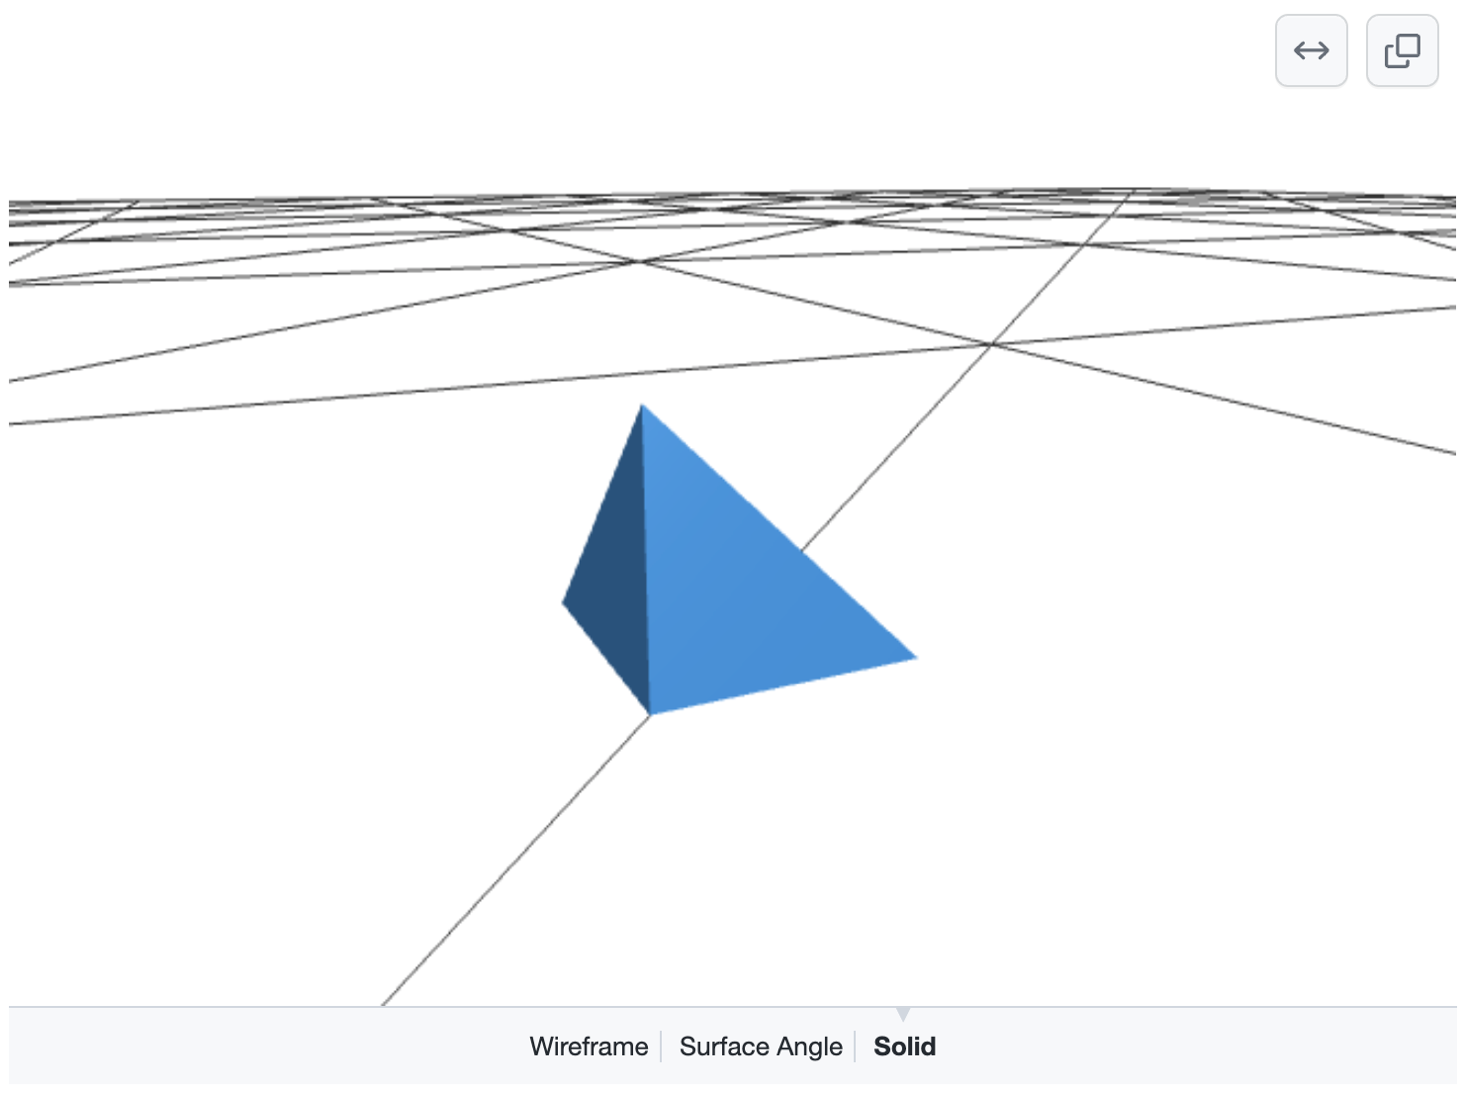 Screenshot of a rendered, manipulable 3D model showing a blue pyramid atop a grid of black lines on a white ground. Options to select "Wireframe," "Surface Angle," or "Solid" appear at bottom.